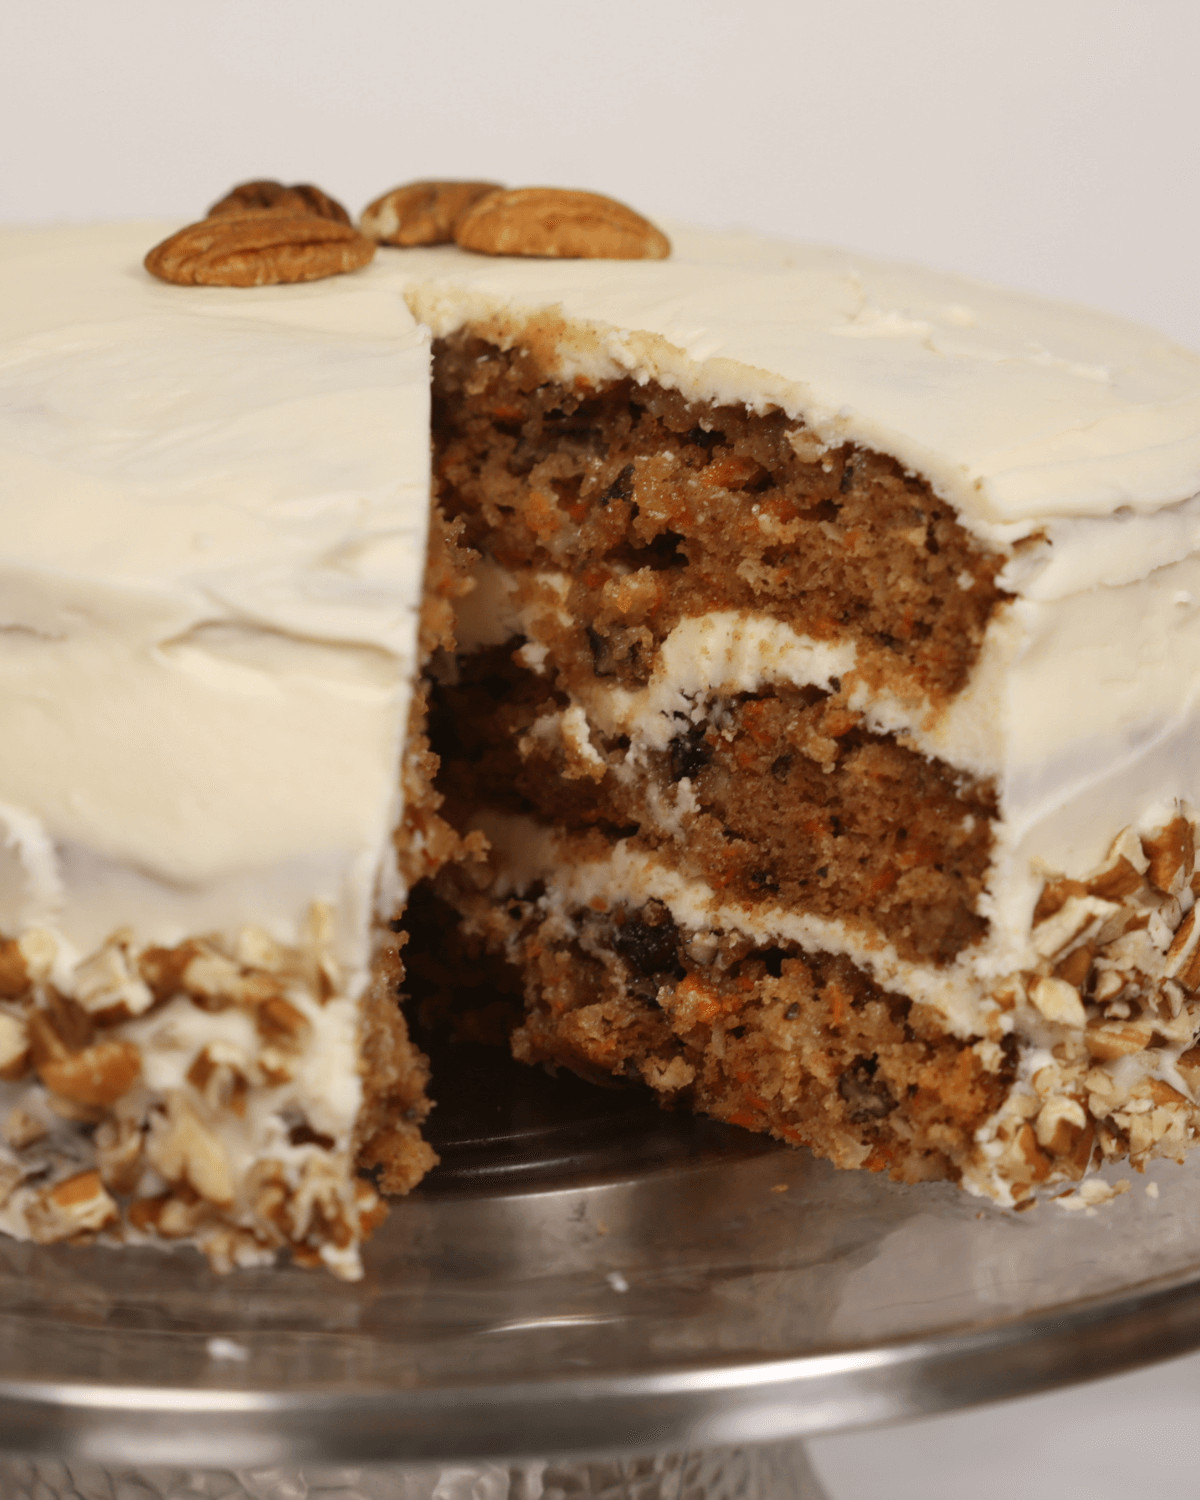 A carrot cake with pineapple and coconut, cream cheese frosting, and chopped nuts, with one slice removed.